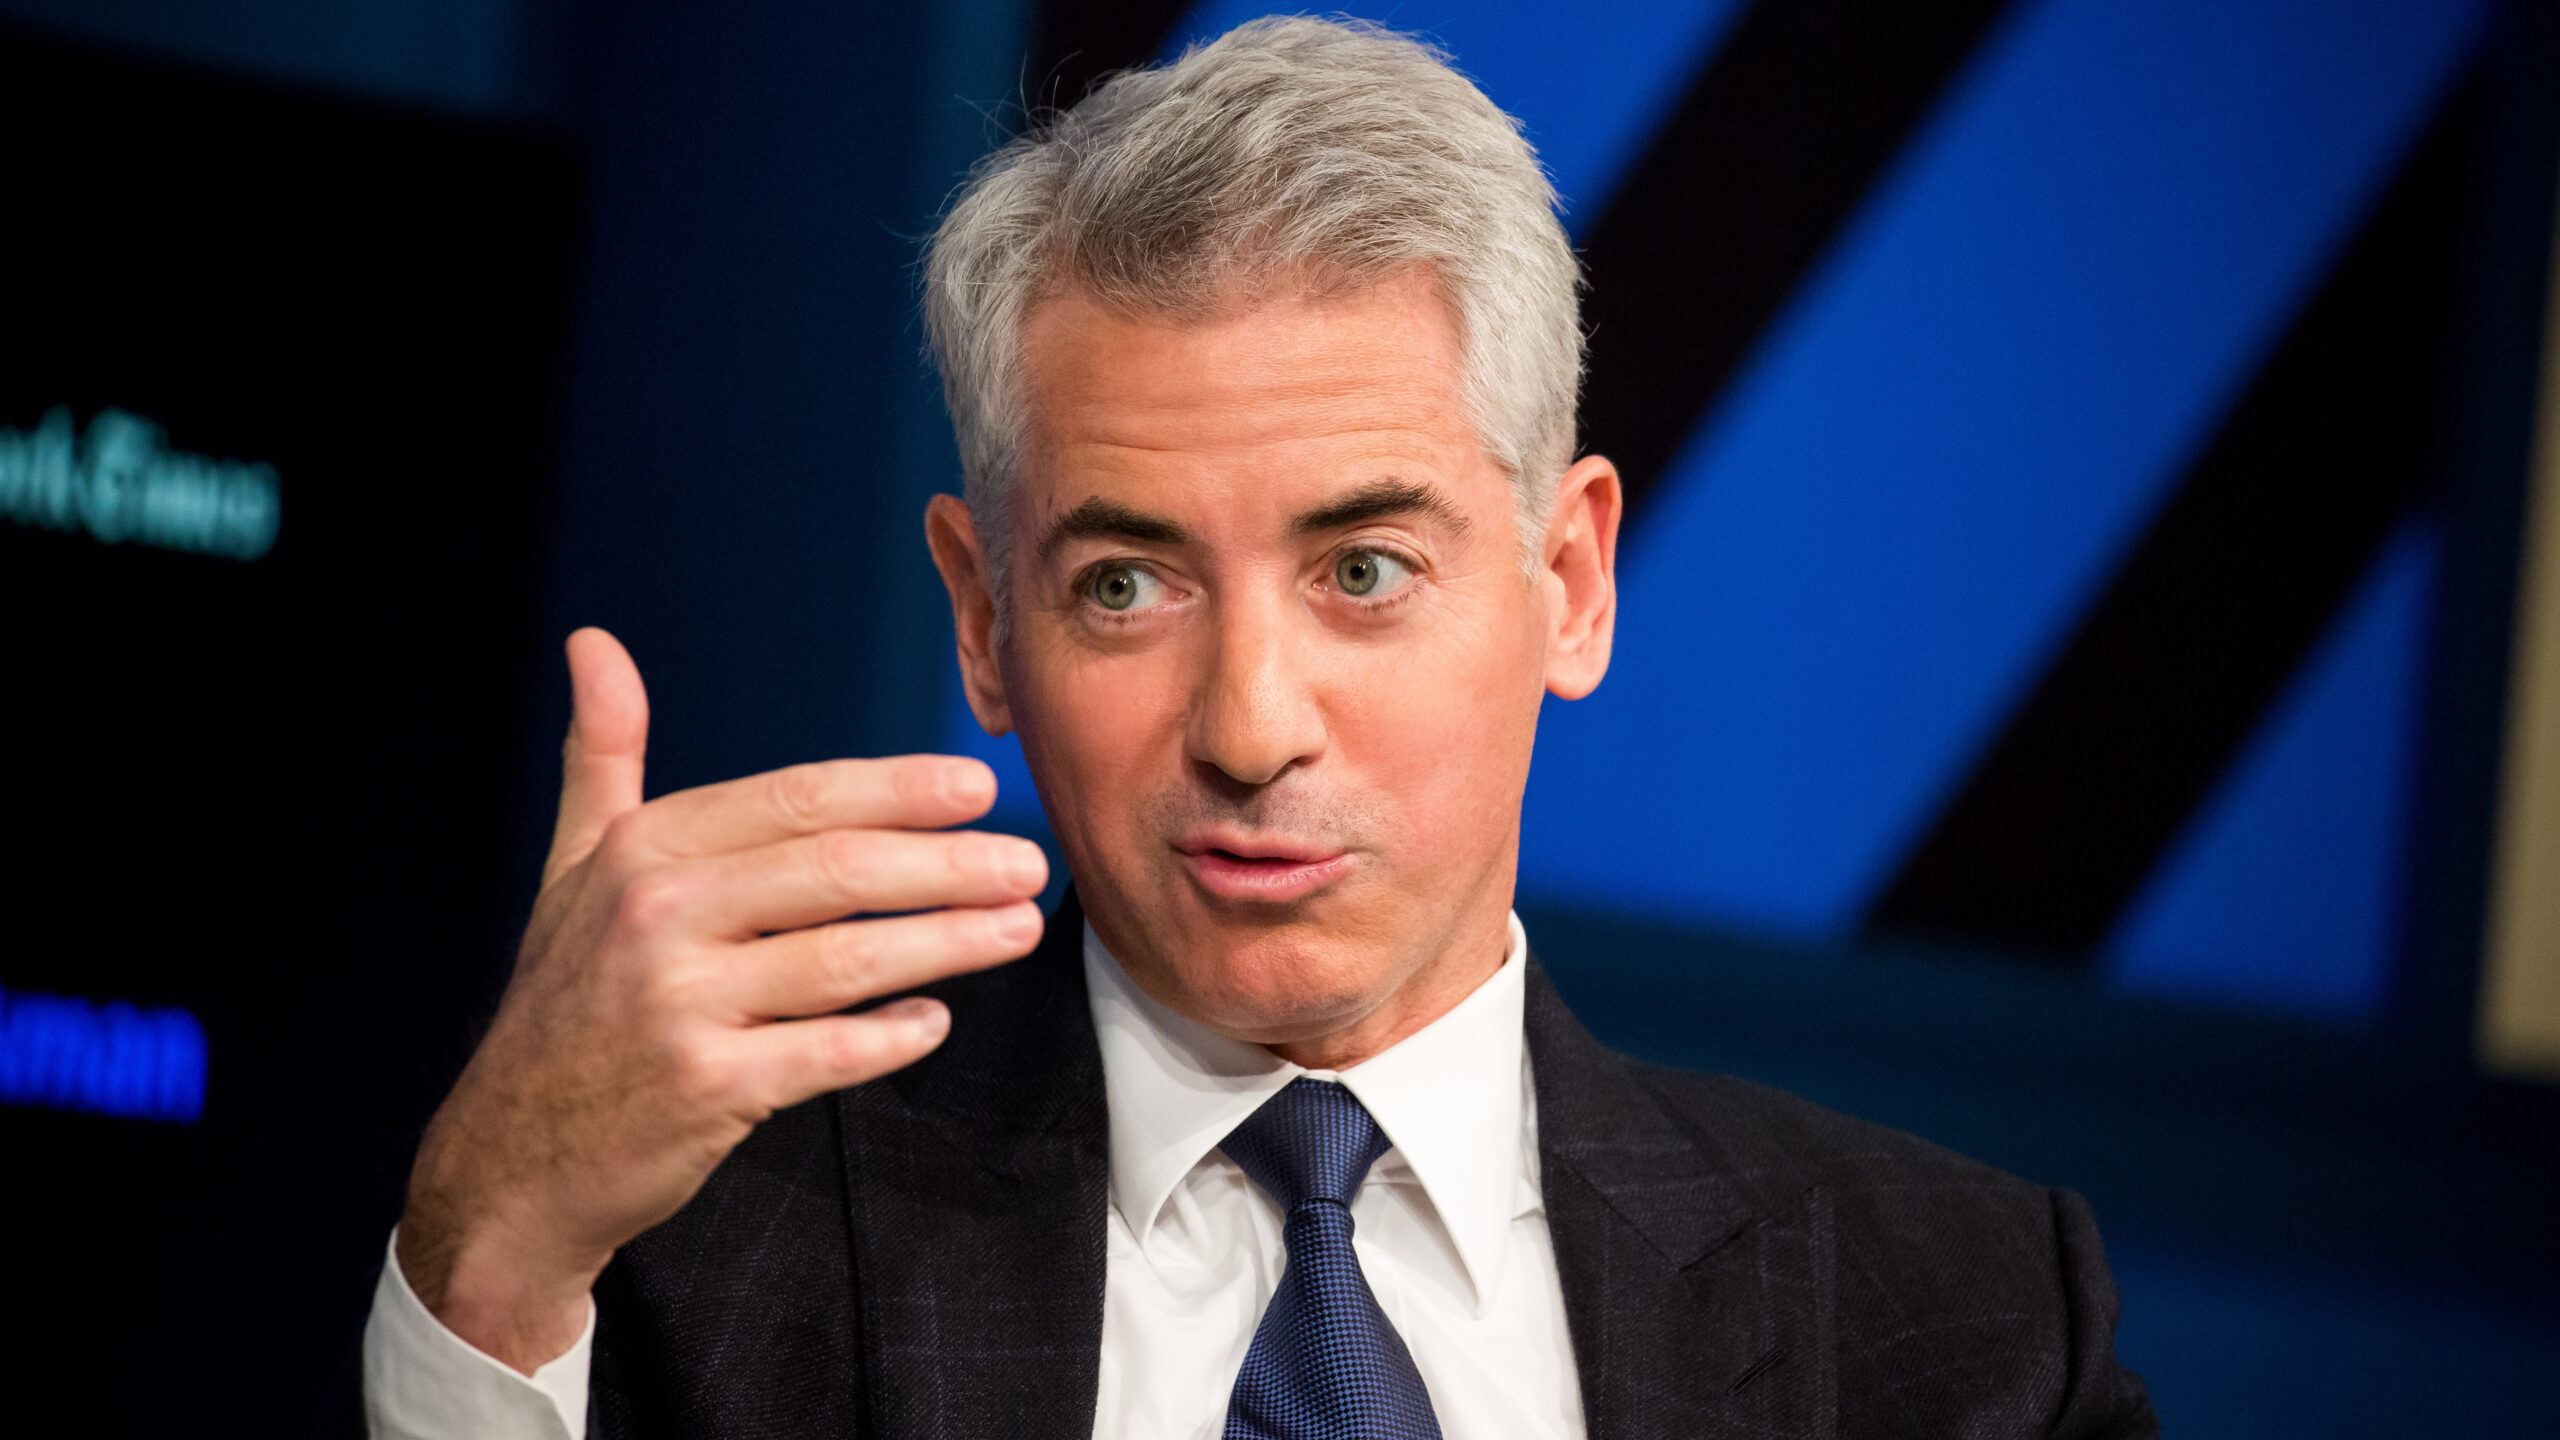 Billionaire Bill Ackman, a Democrat for years, may support Trump over Biden, says report